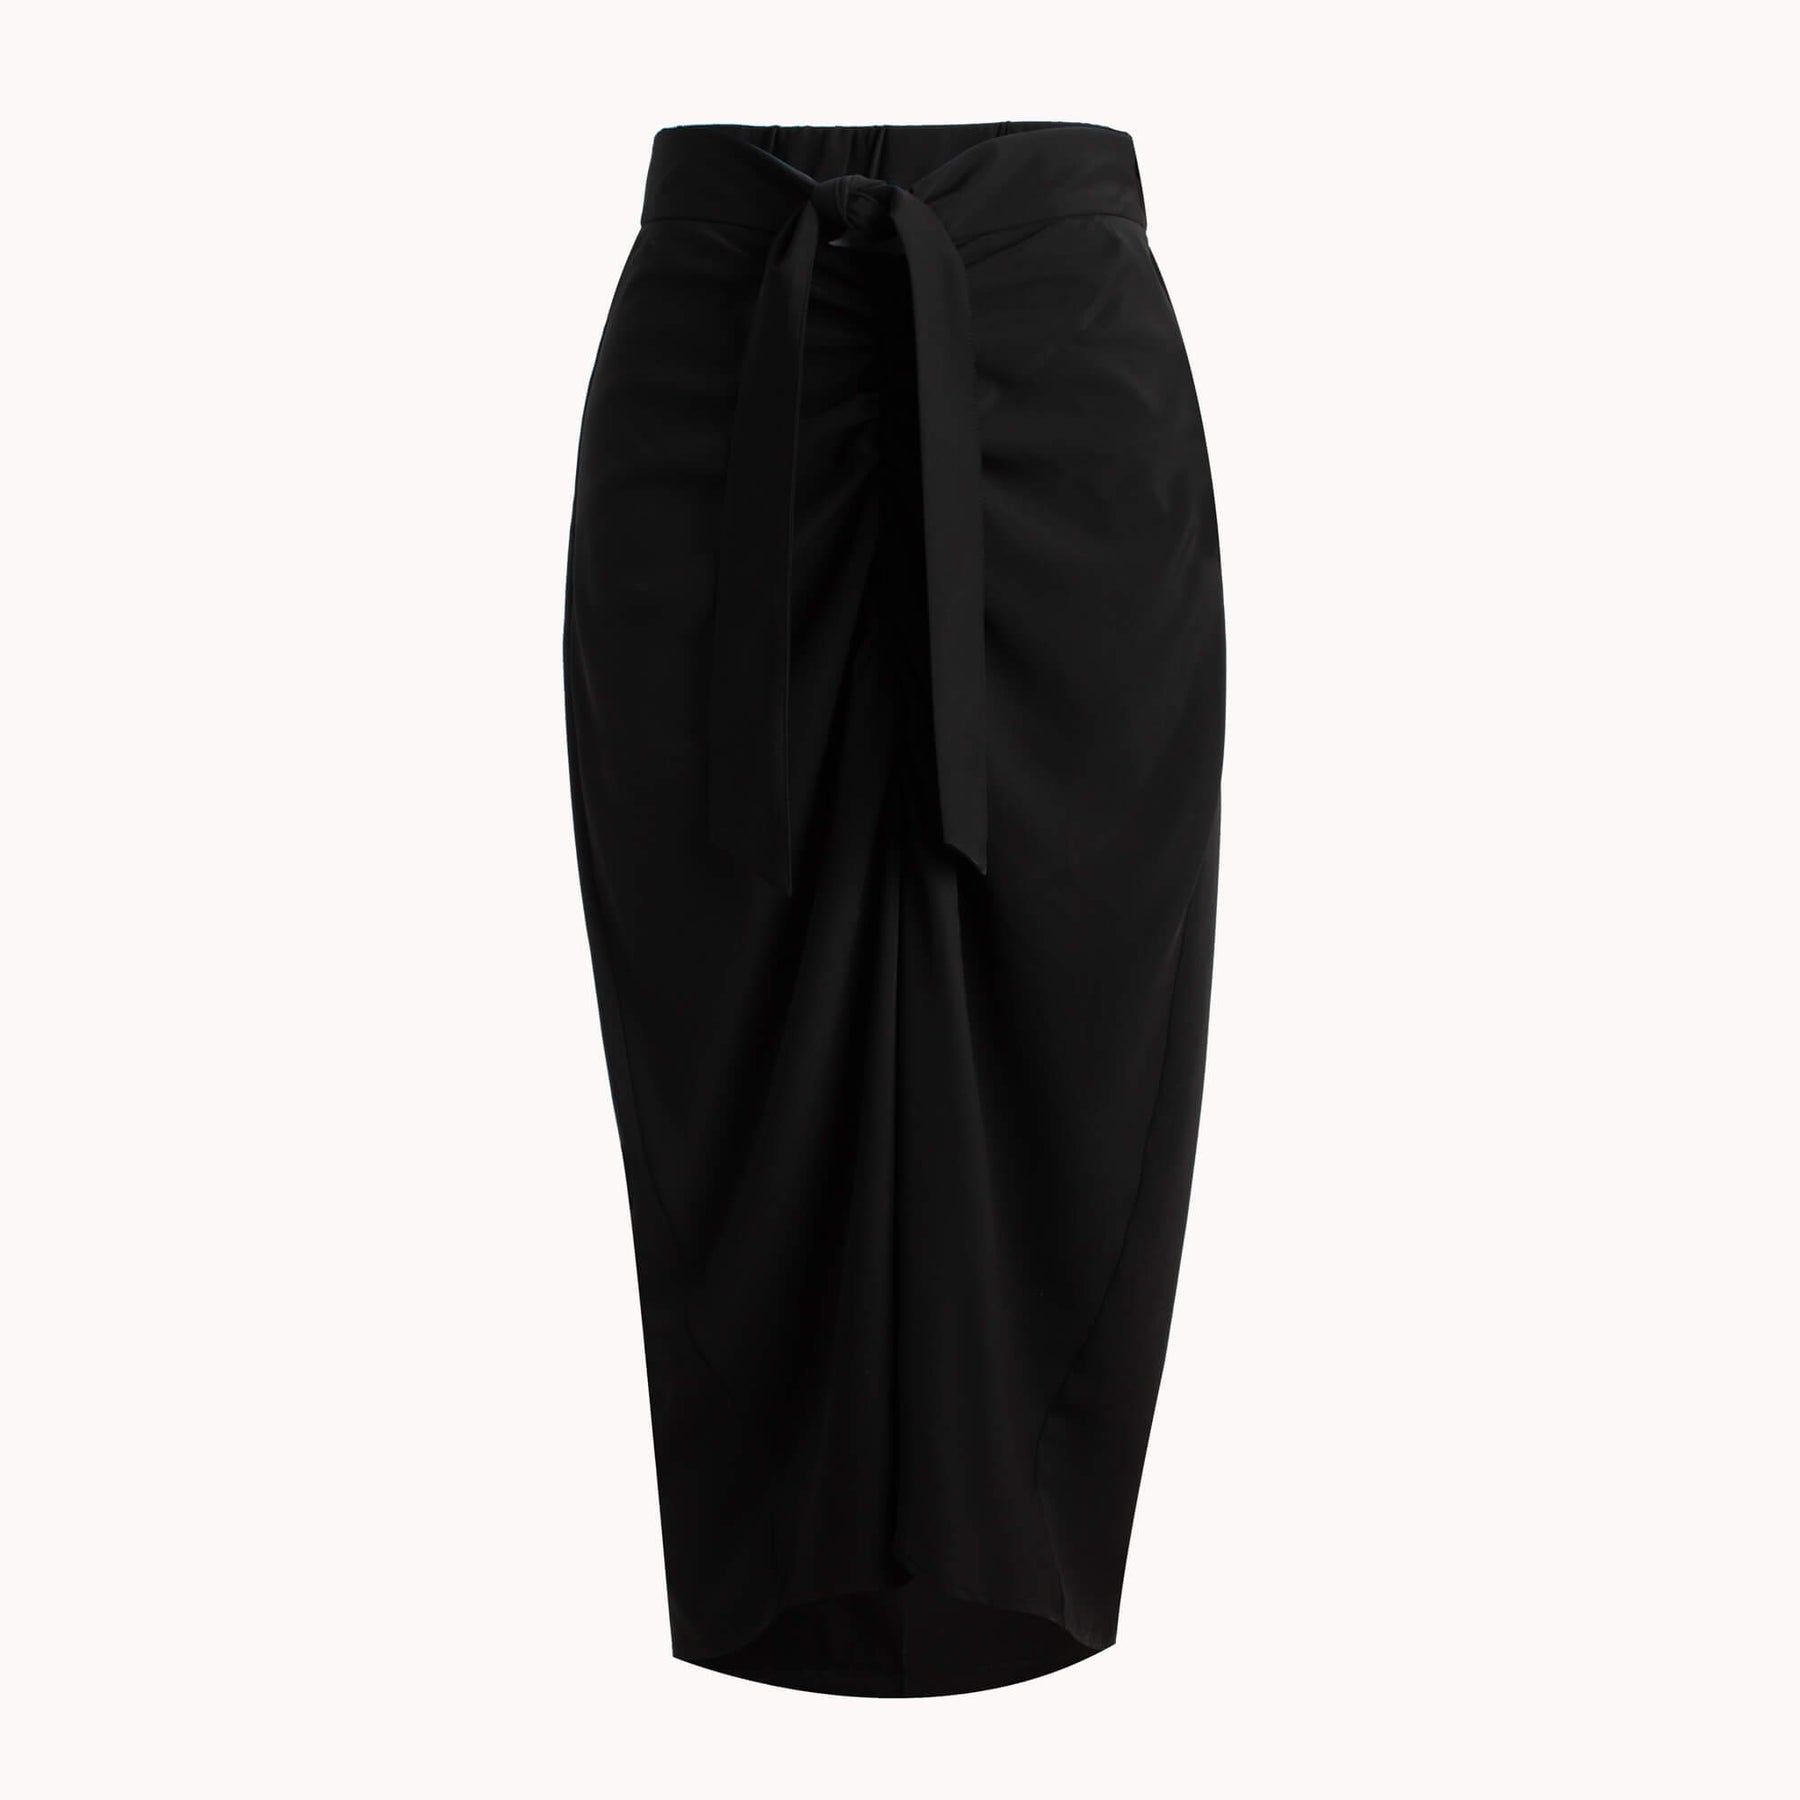 Kayleen Ruched Skirt